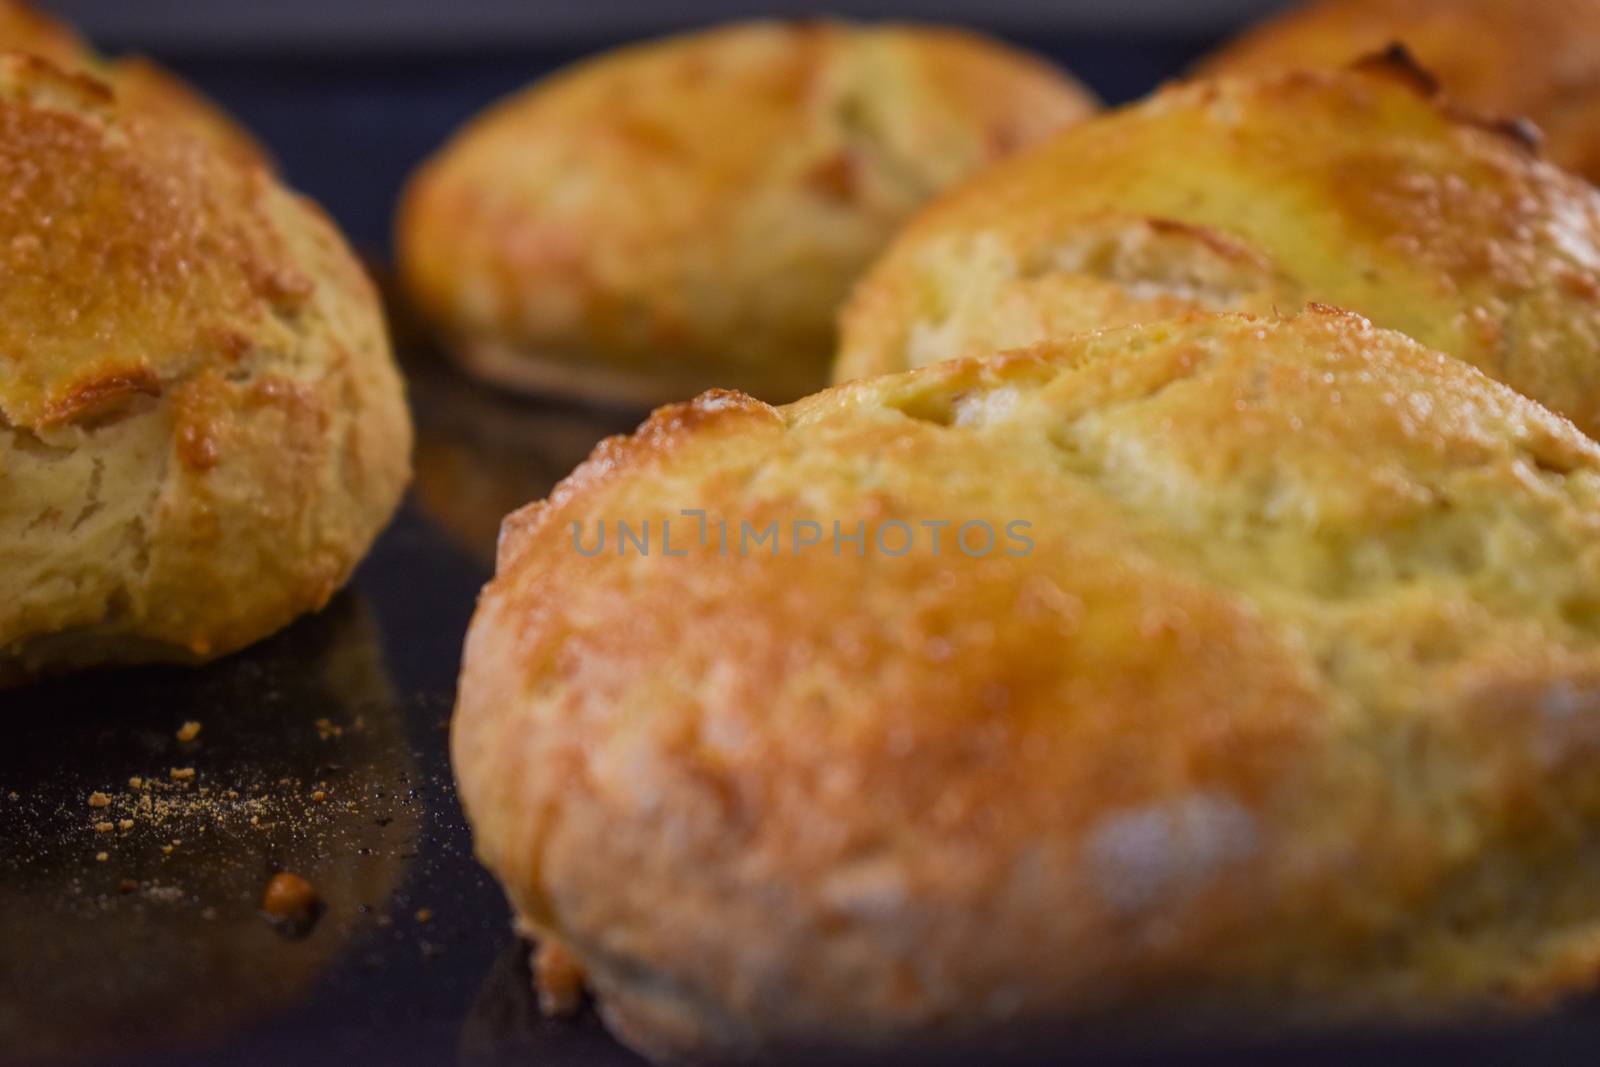 A close up of home made baked scones